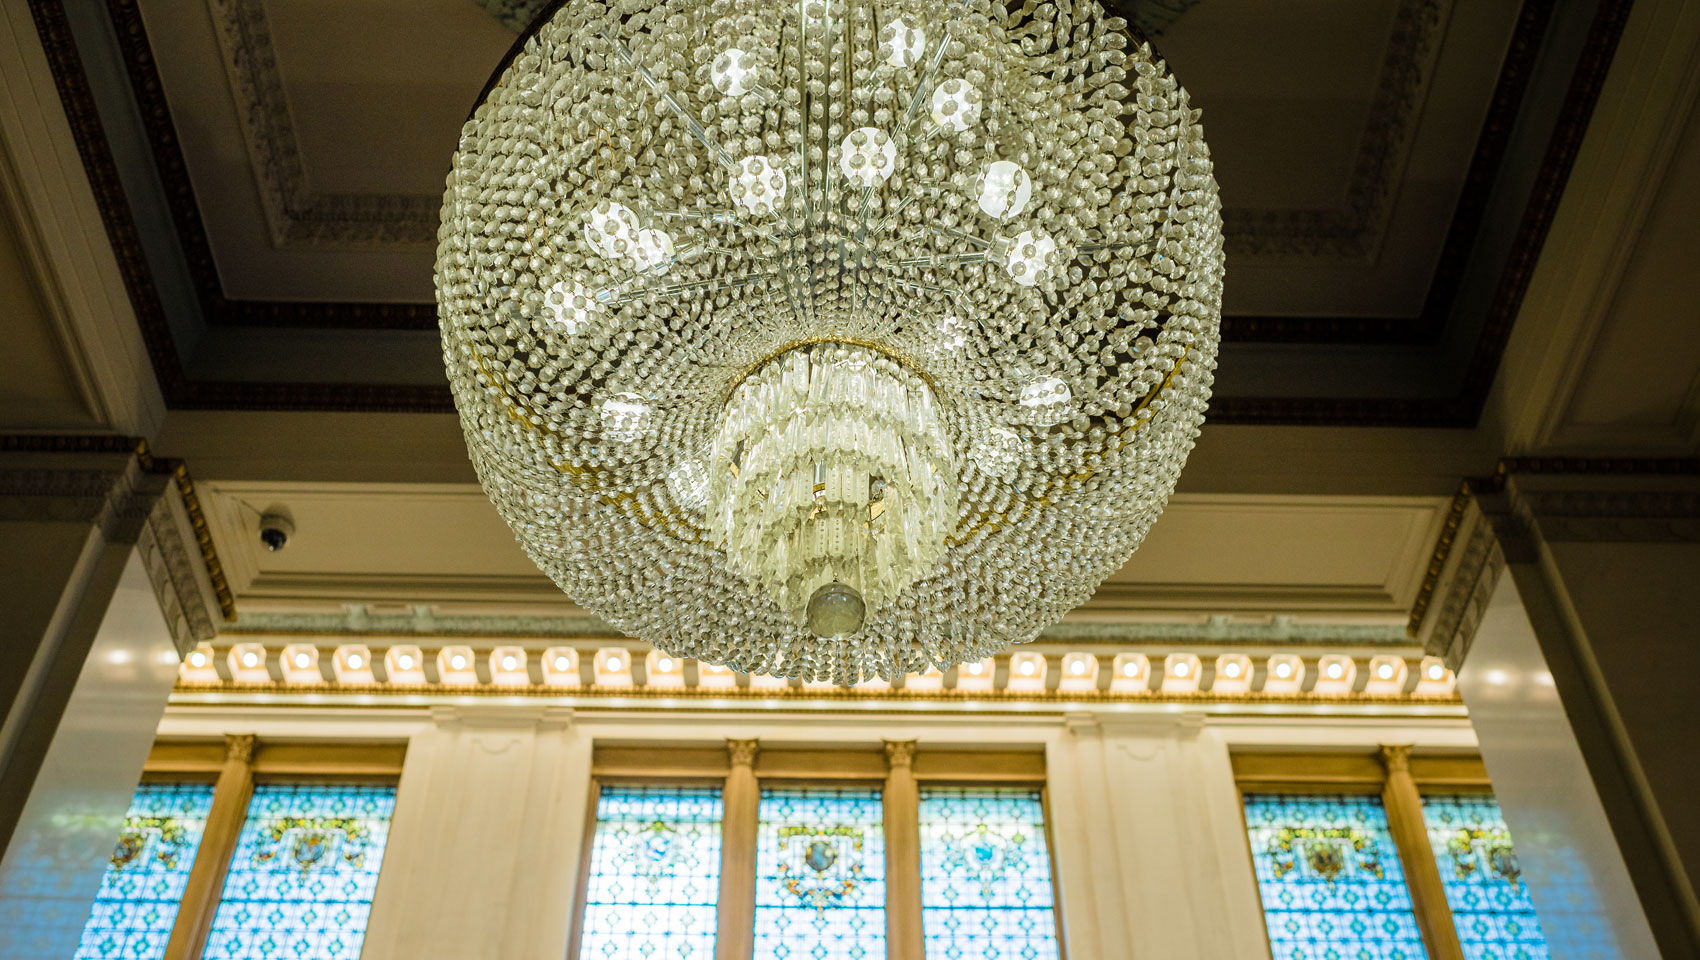 Upward view of the main entryway's grandiose chandelier that illuminates the open space's marble surroundings.